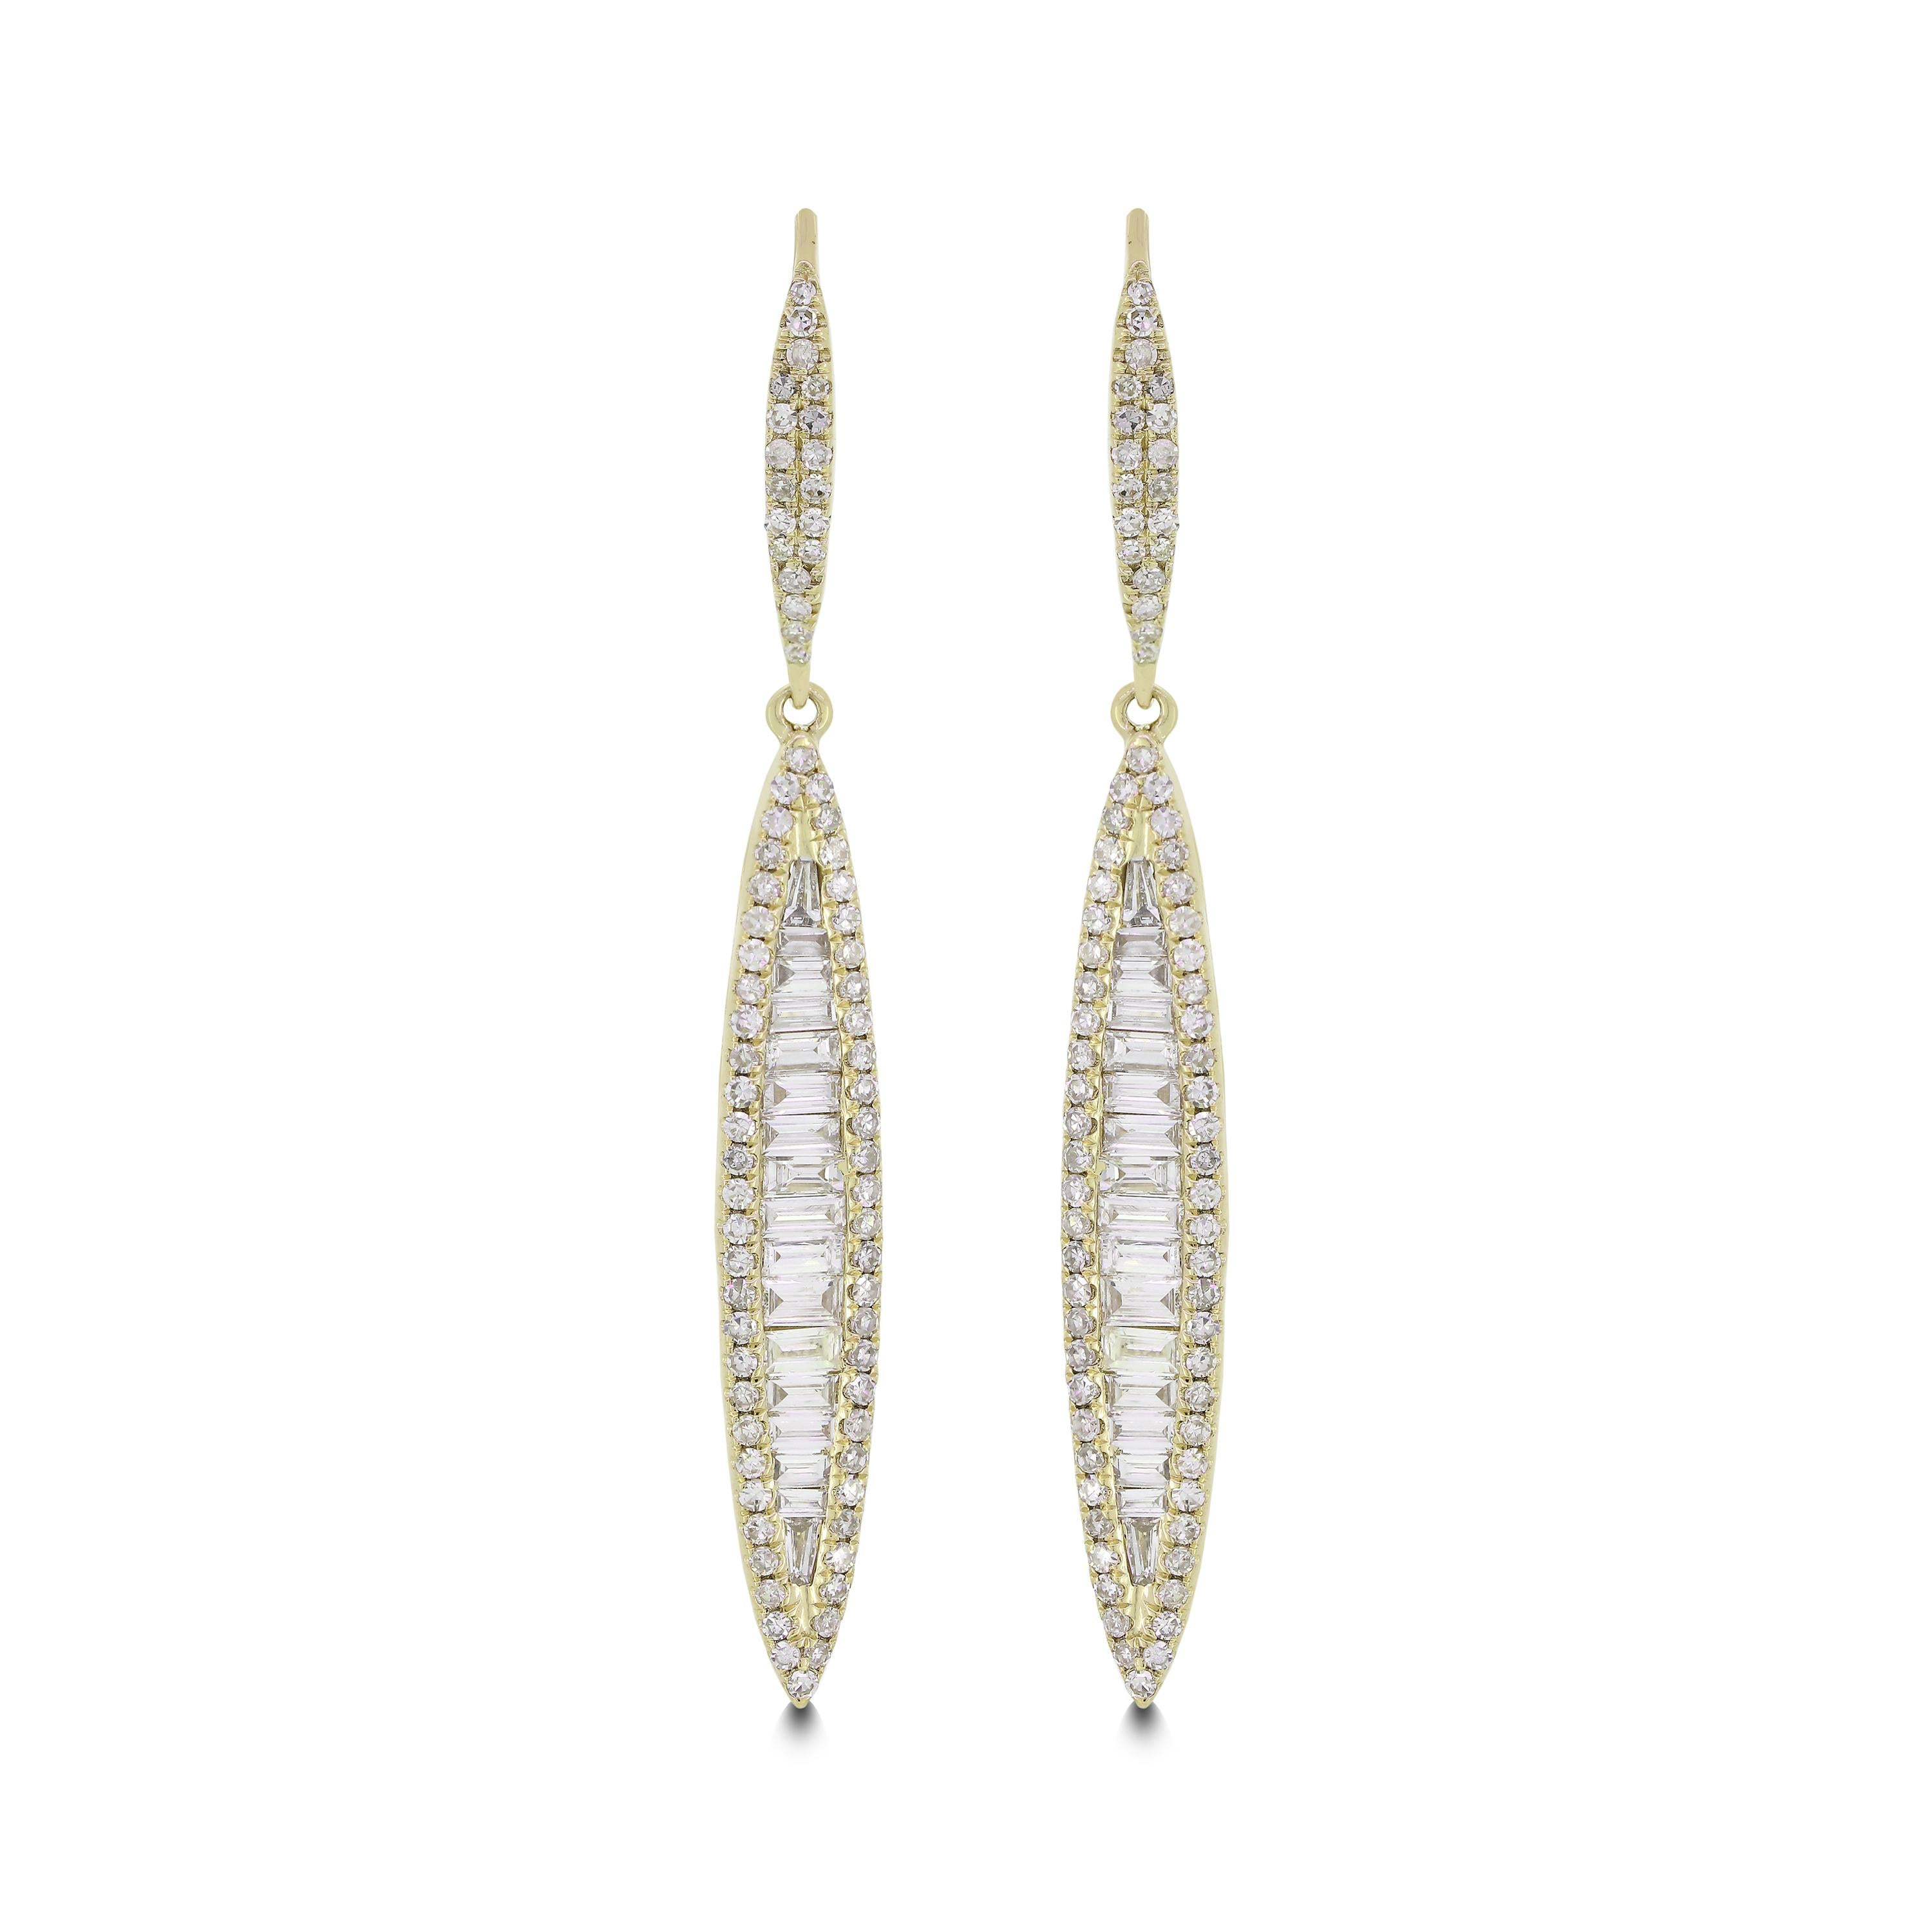 Elevate your ensemble with this Luxle gorgeous pair of drop earrings encrusted with a row of baguettes framed in pave round diamonds set in 18k yellow gold.

Please follow the Luxury Jewels storefront to view the latest collections & exclusive one